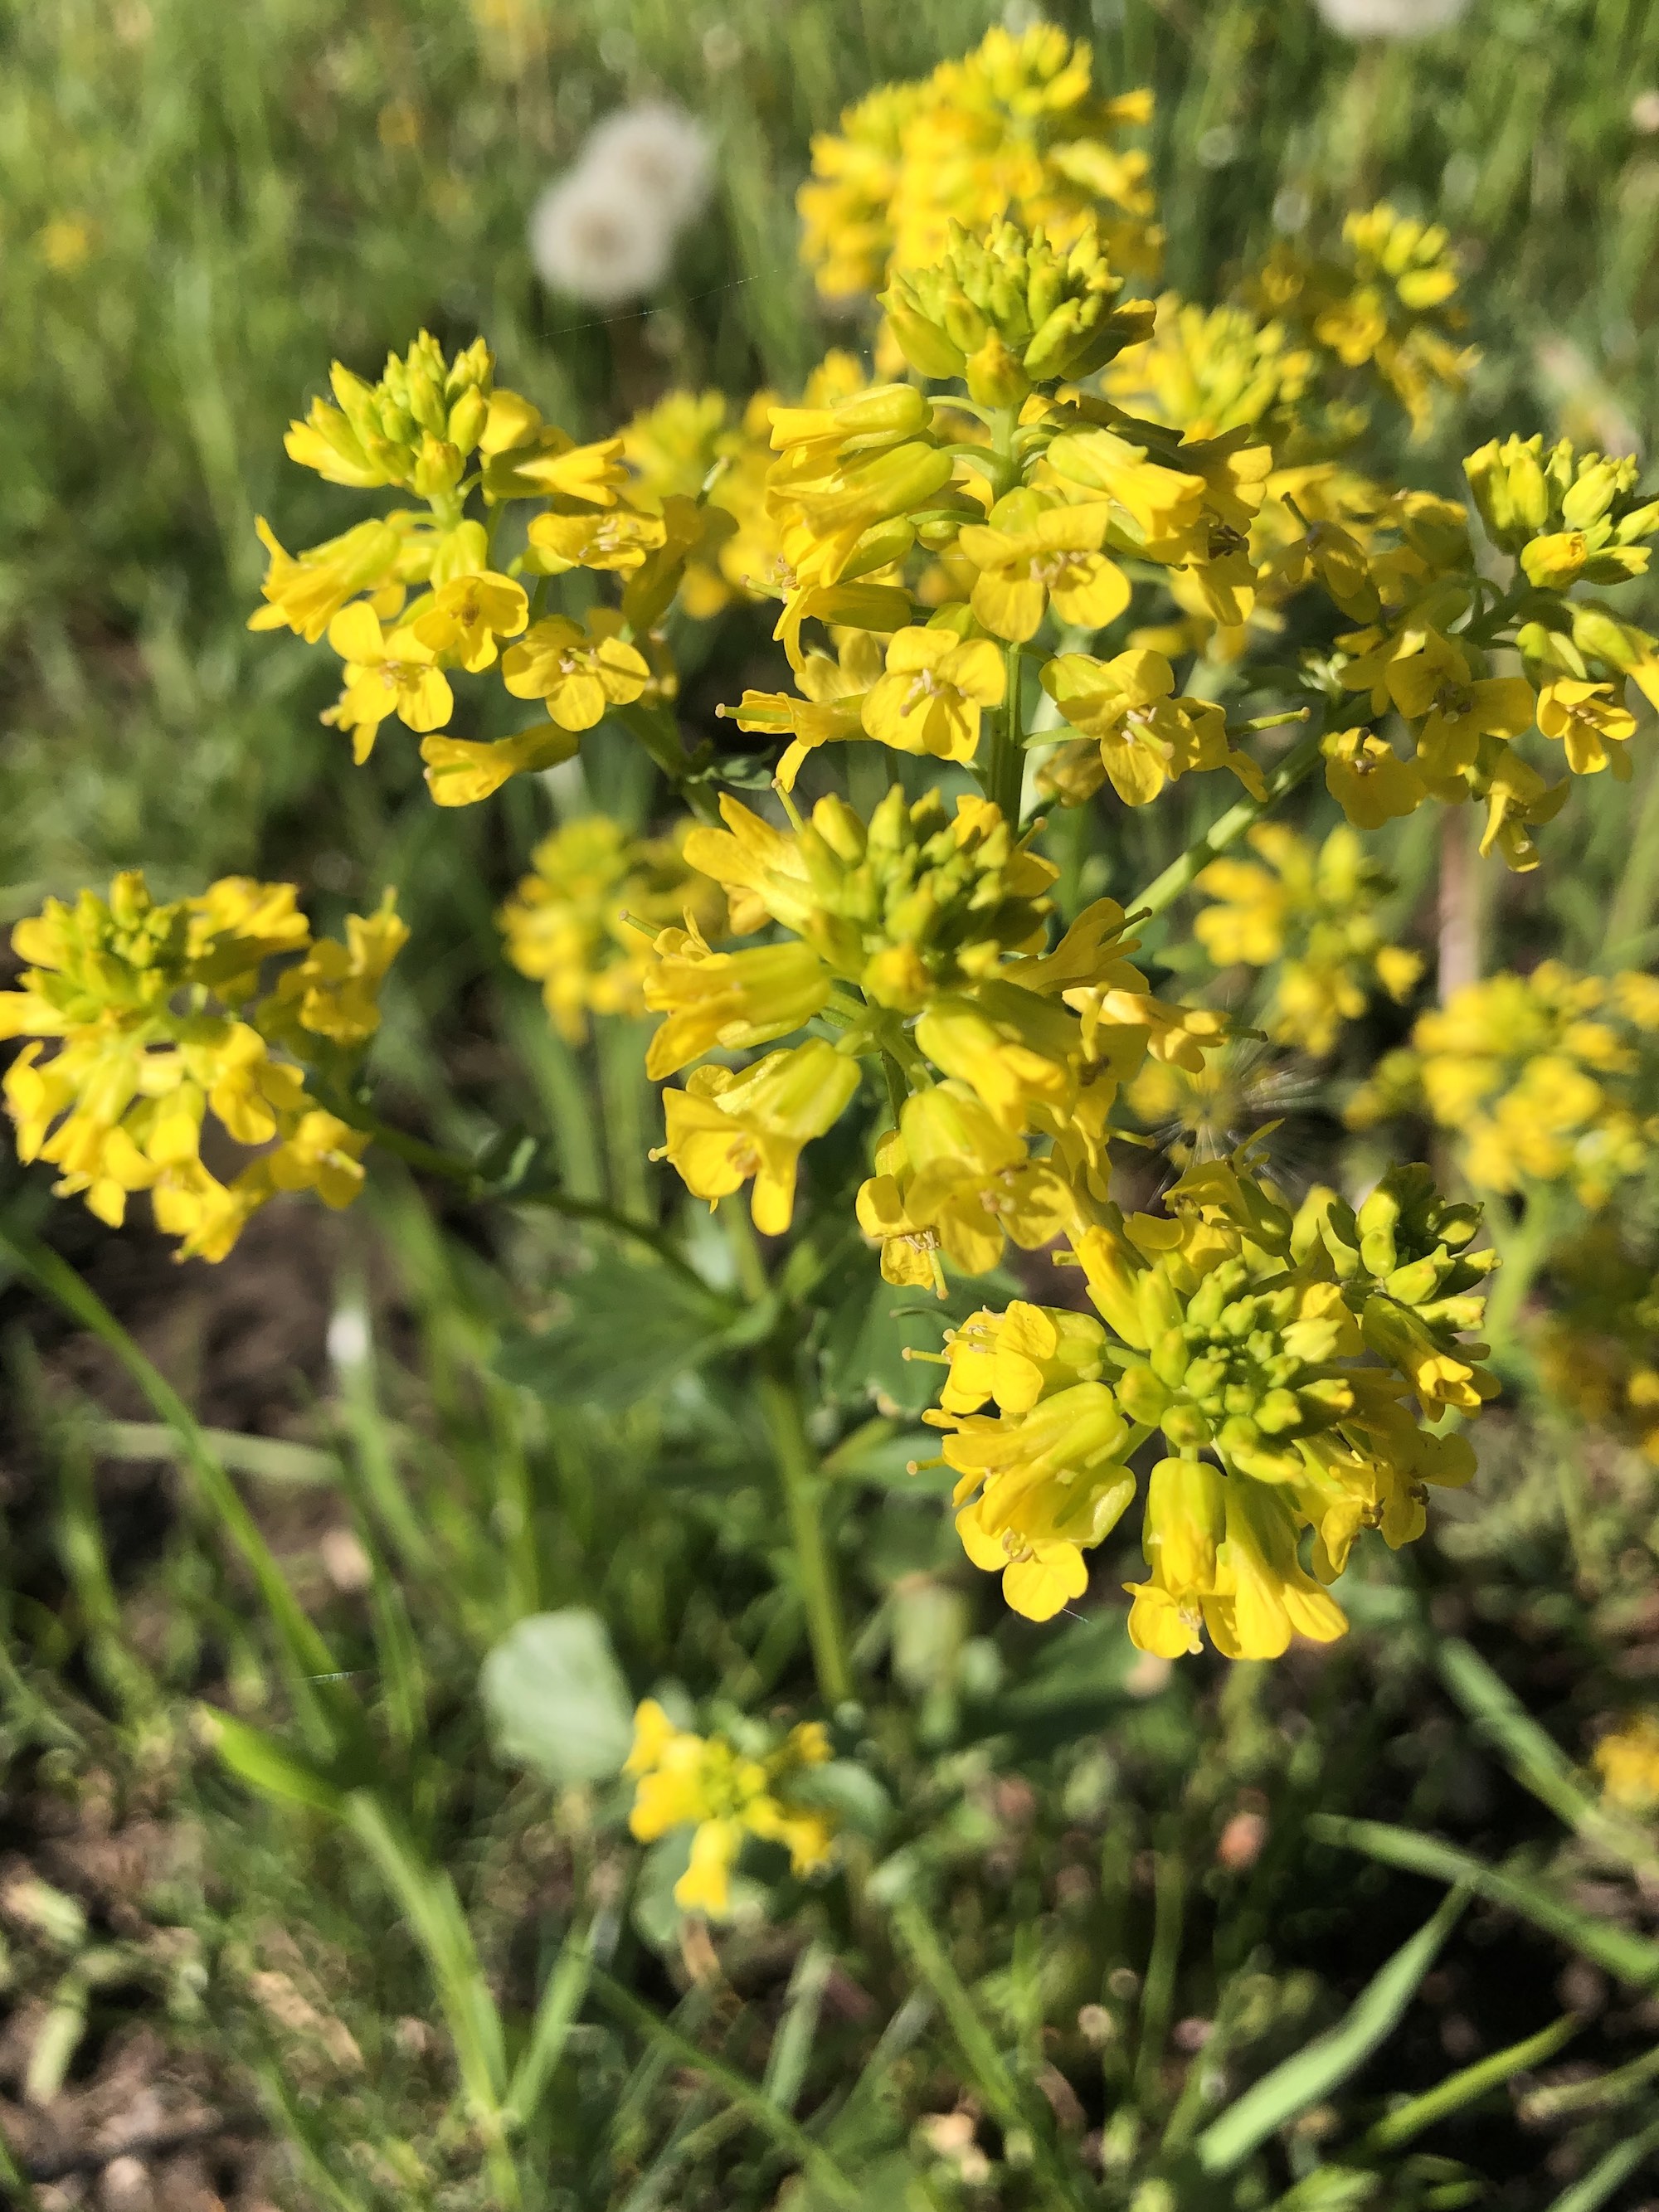 Garden Yellow Rocket in Marion Dunn Prairie in Madison, Wisconsin on May 4, 2021.